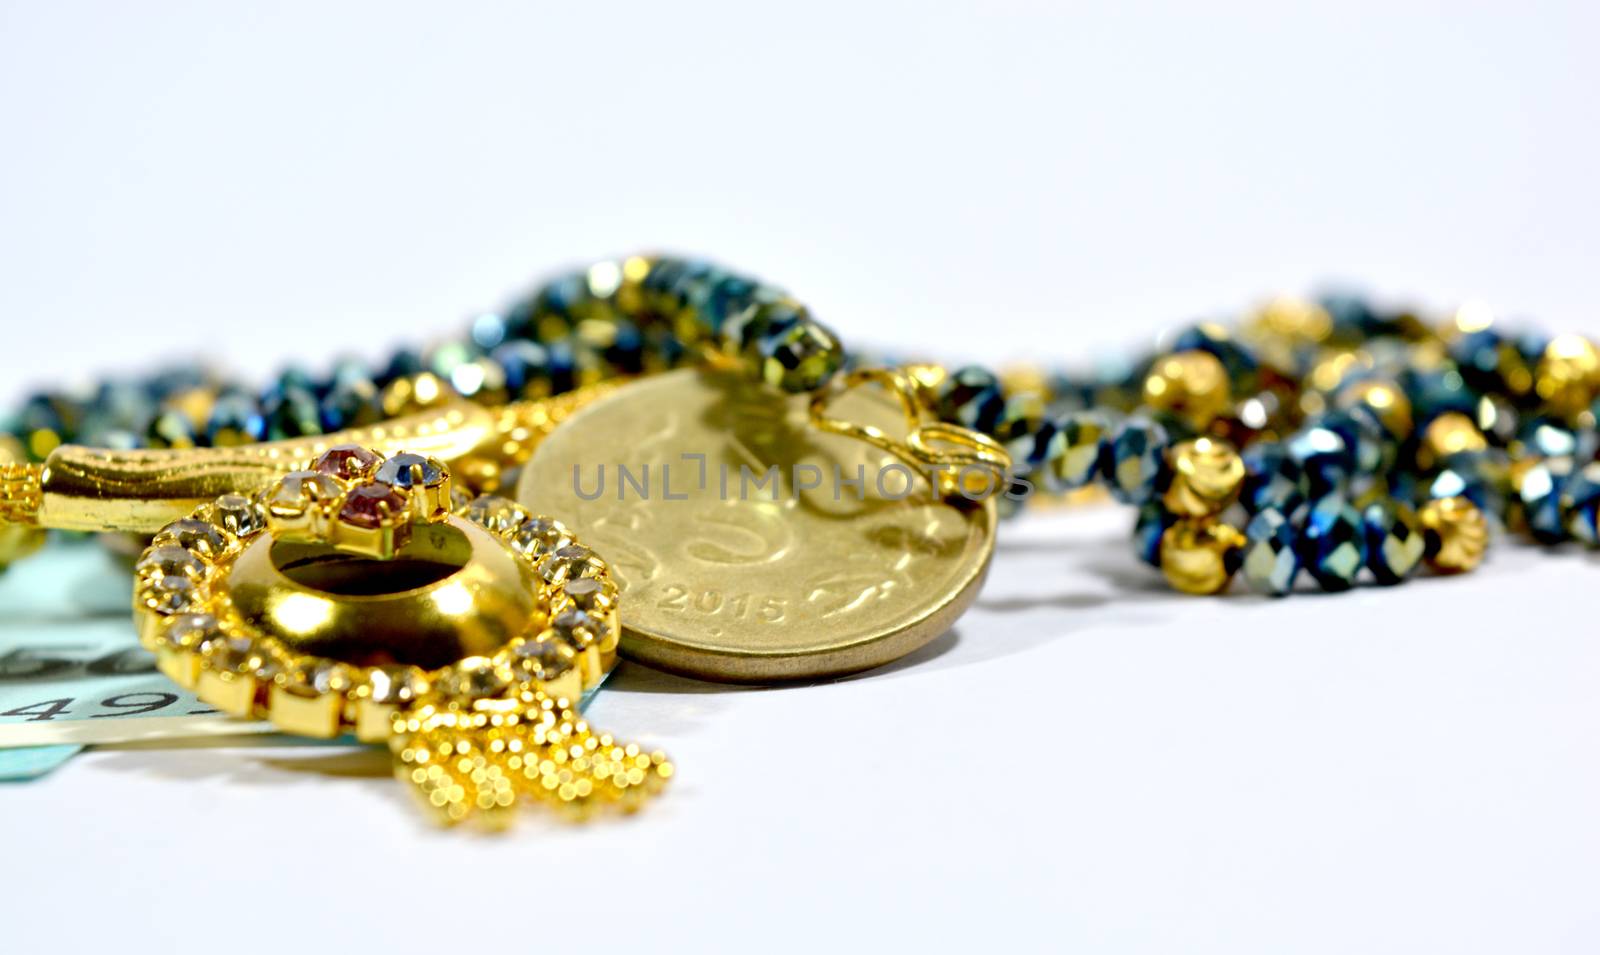 New indian 50 Rupees currency and 10 rupess Coinswith jewellery on isolated background by lakshmiprasad.maski@gmai.com